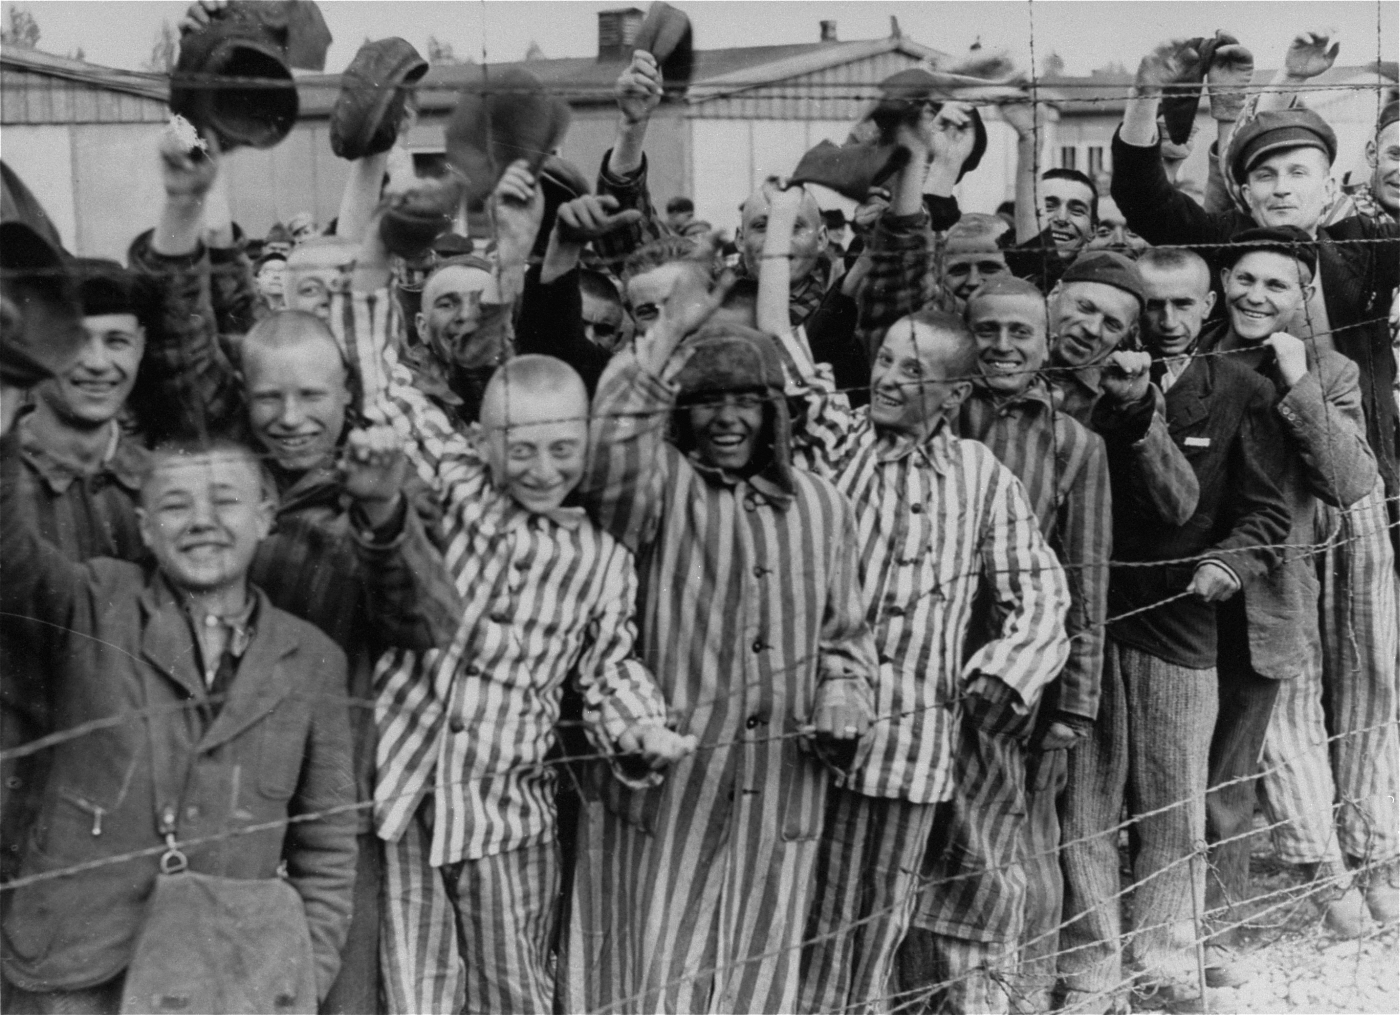 Prisoners celebrating the arrival of United States Army troops, Dachau Concentration Camp, Germany, 29 Apr 1945 (US Holocaust Memorial Museum: 45075)